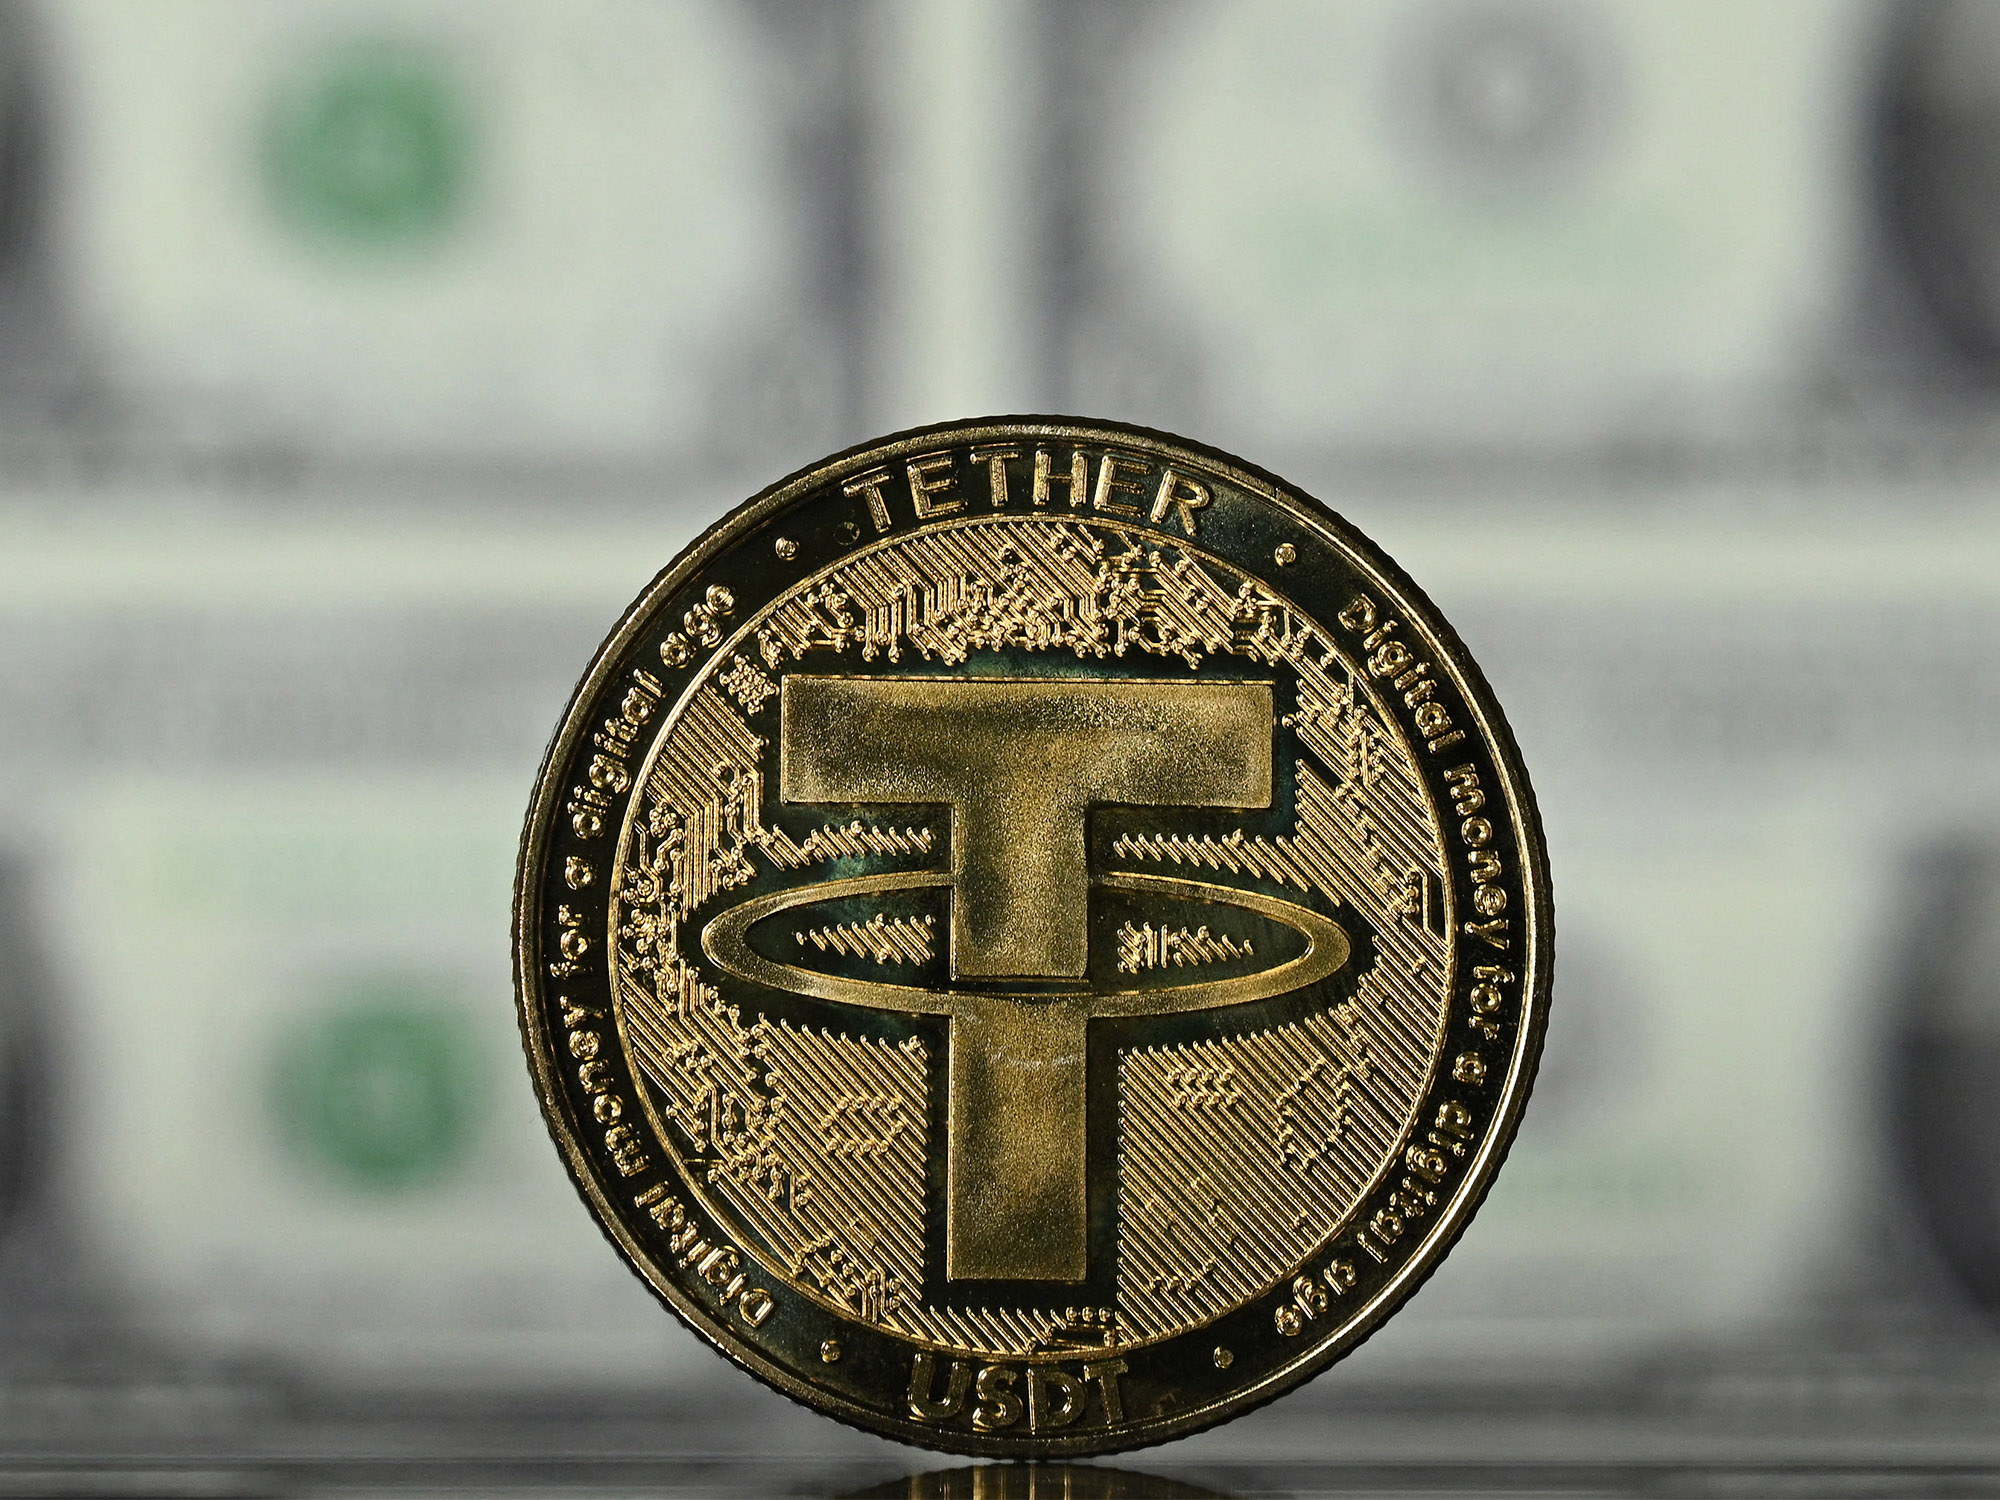 Tether Leads In The Emerging Markets